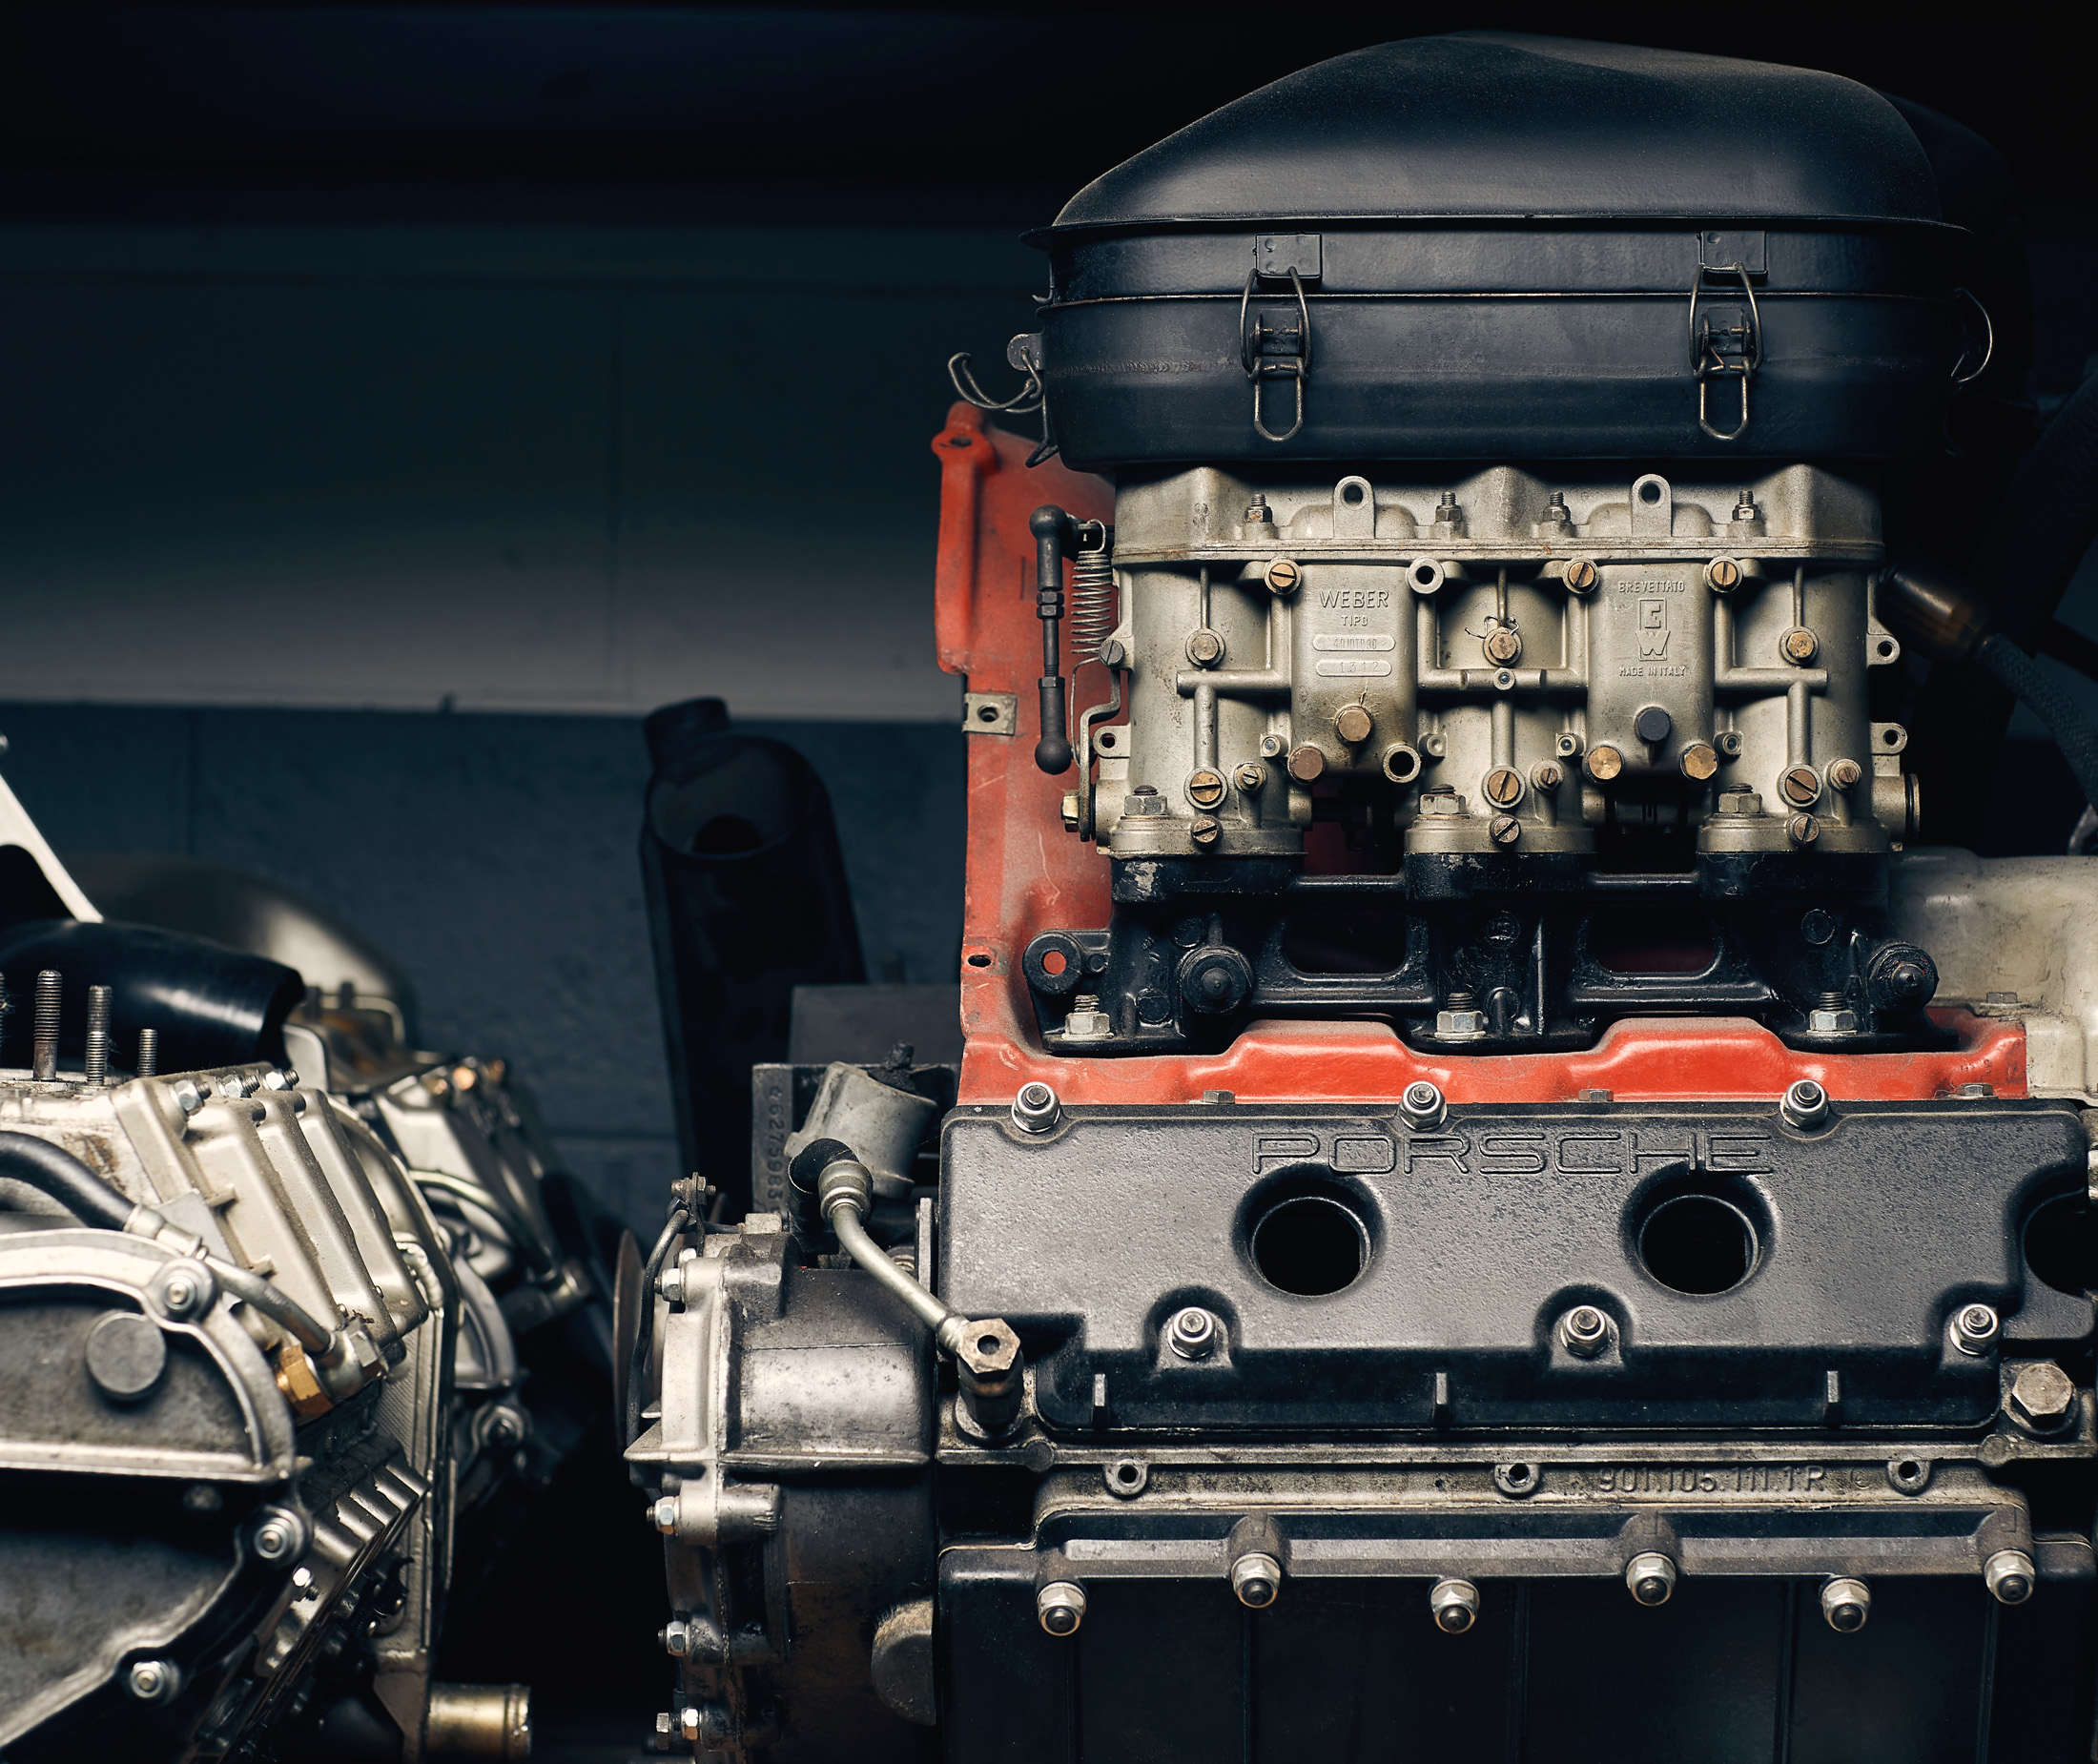 Flatsix engines are six-cylinder air-cooled engines that have been in production since 1963.